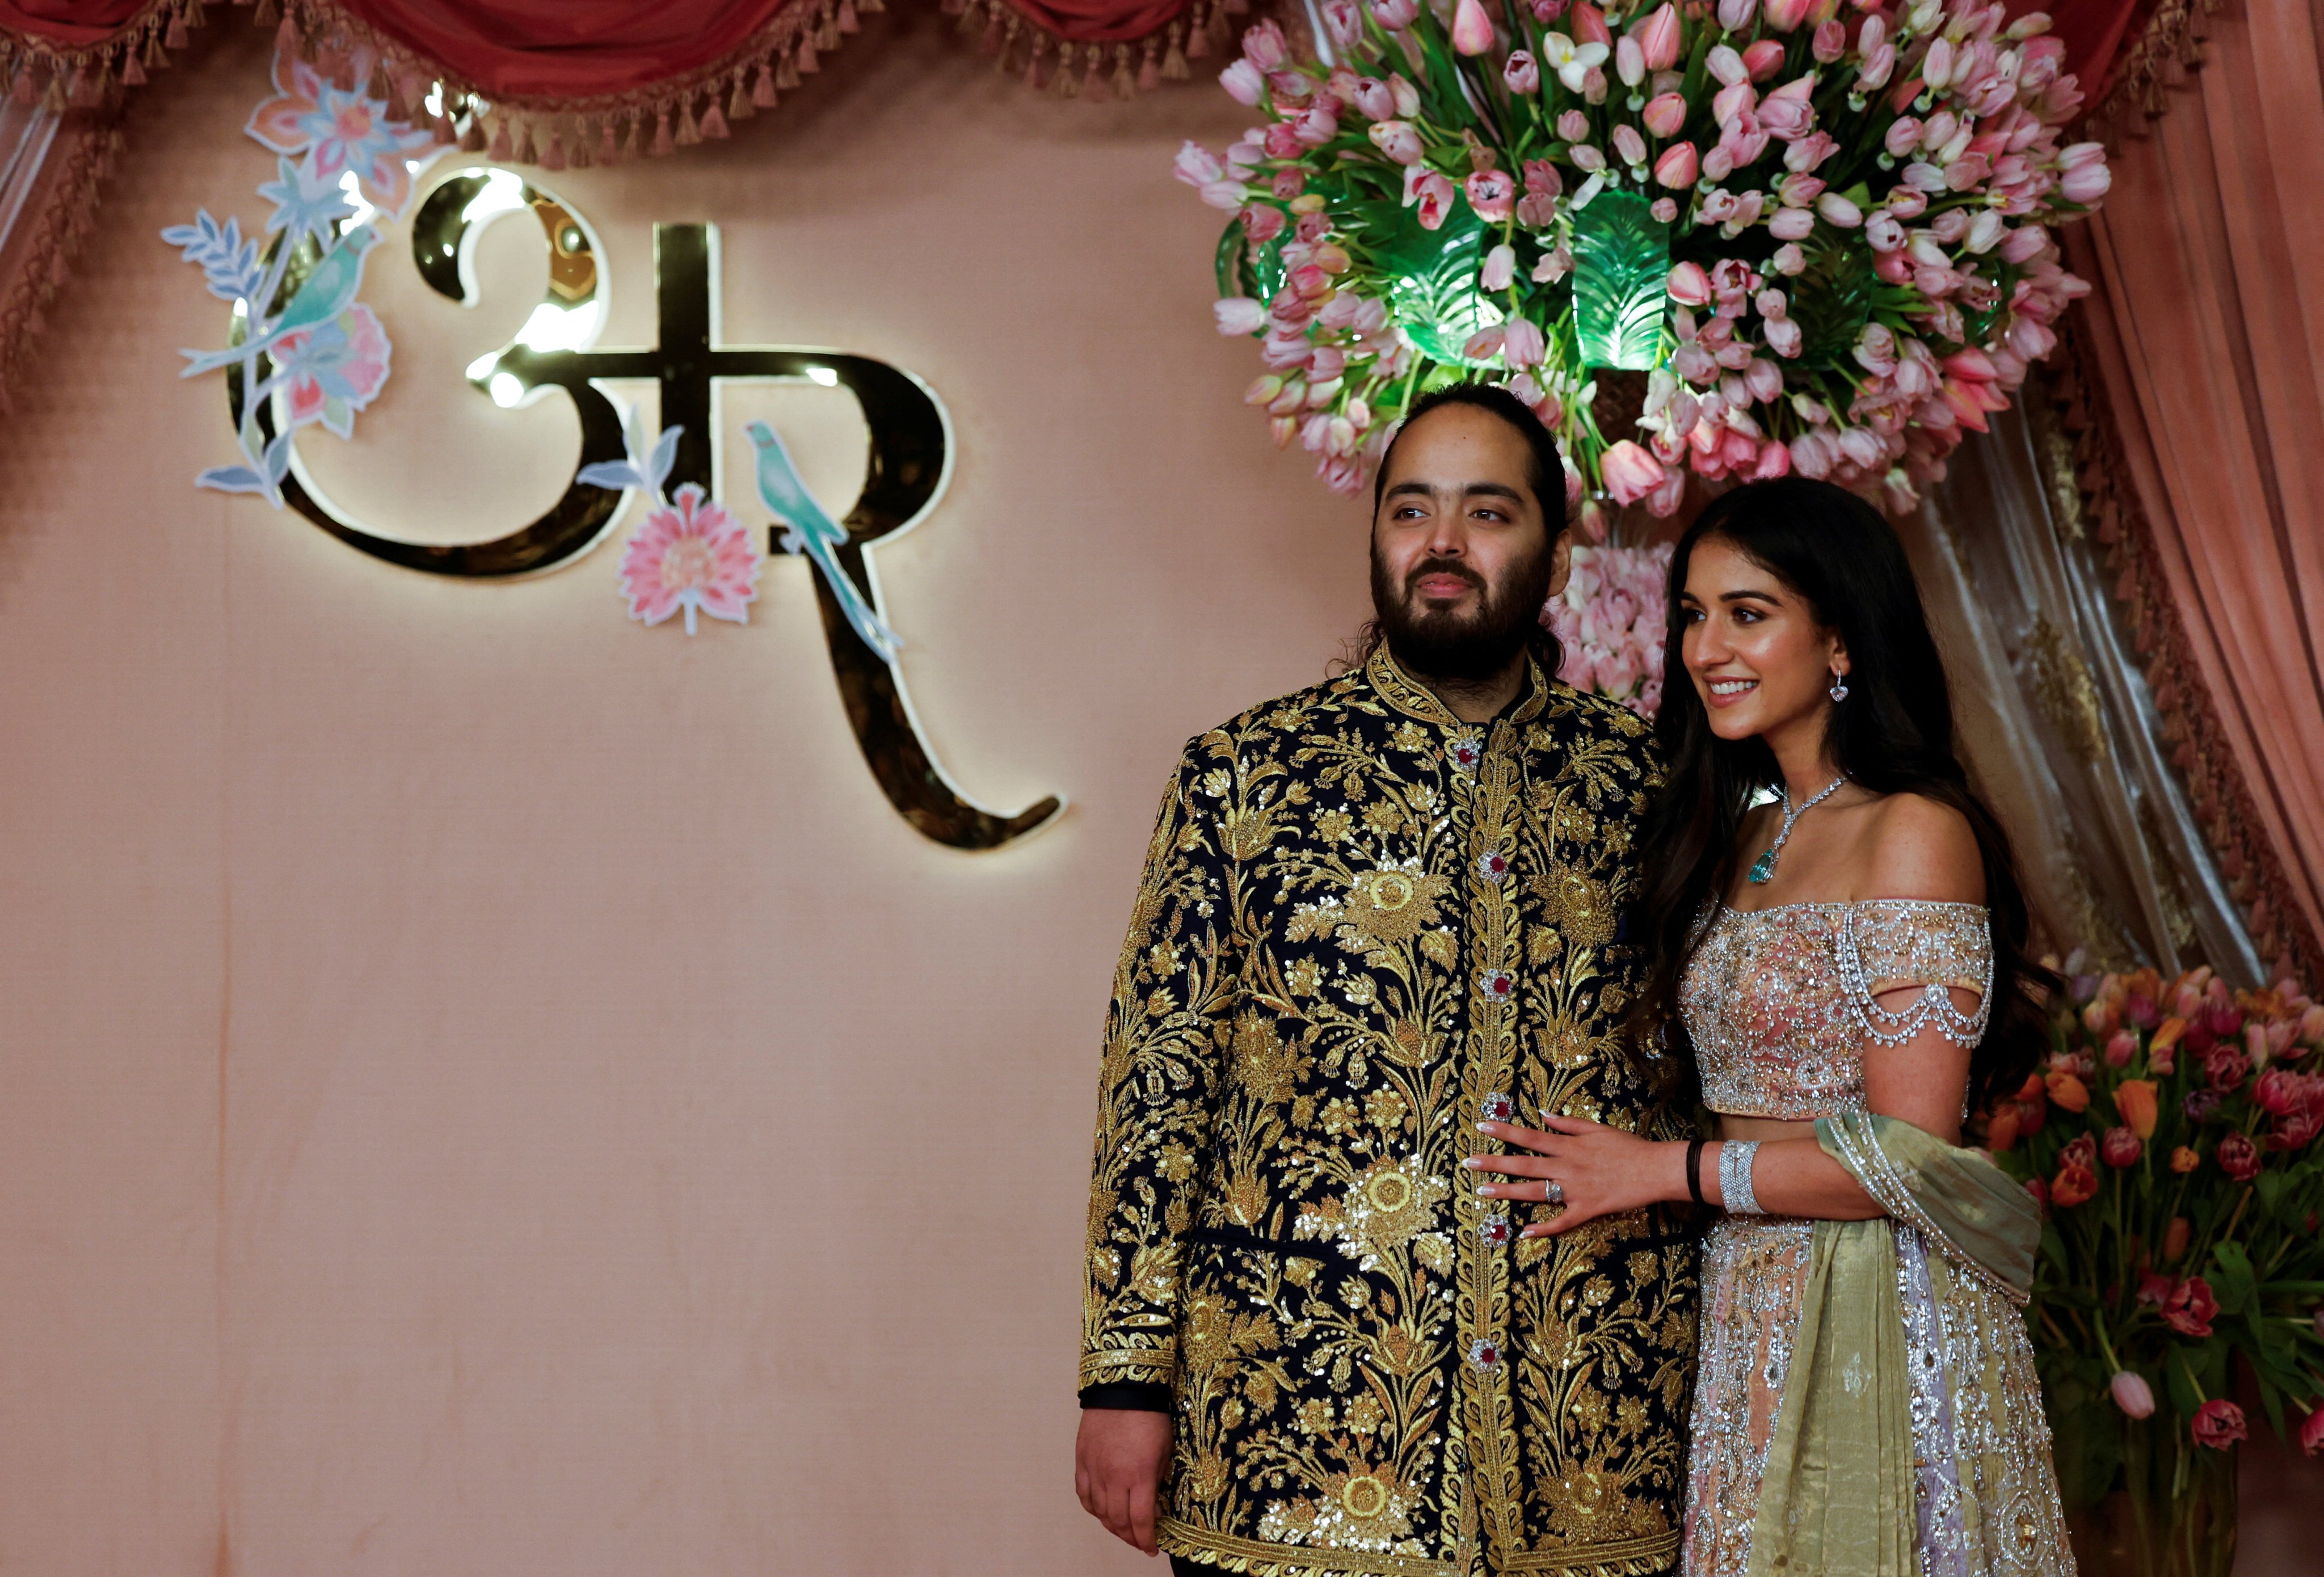 Anant Ambani with his fiancée Radhika Merchant during a ceremony in Mumbai on July 5. Photo: Reuters